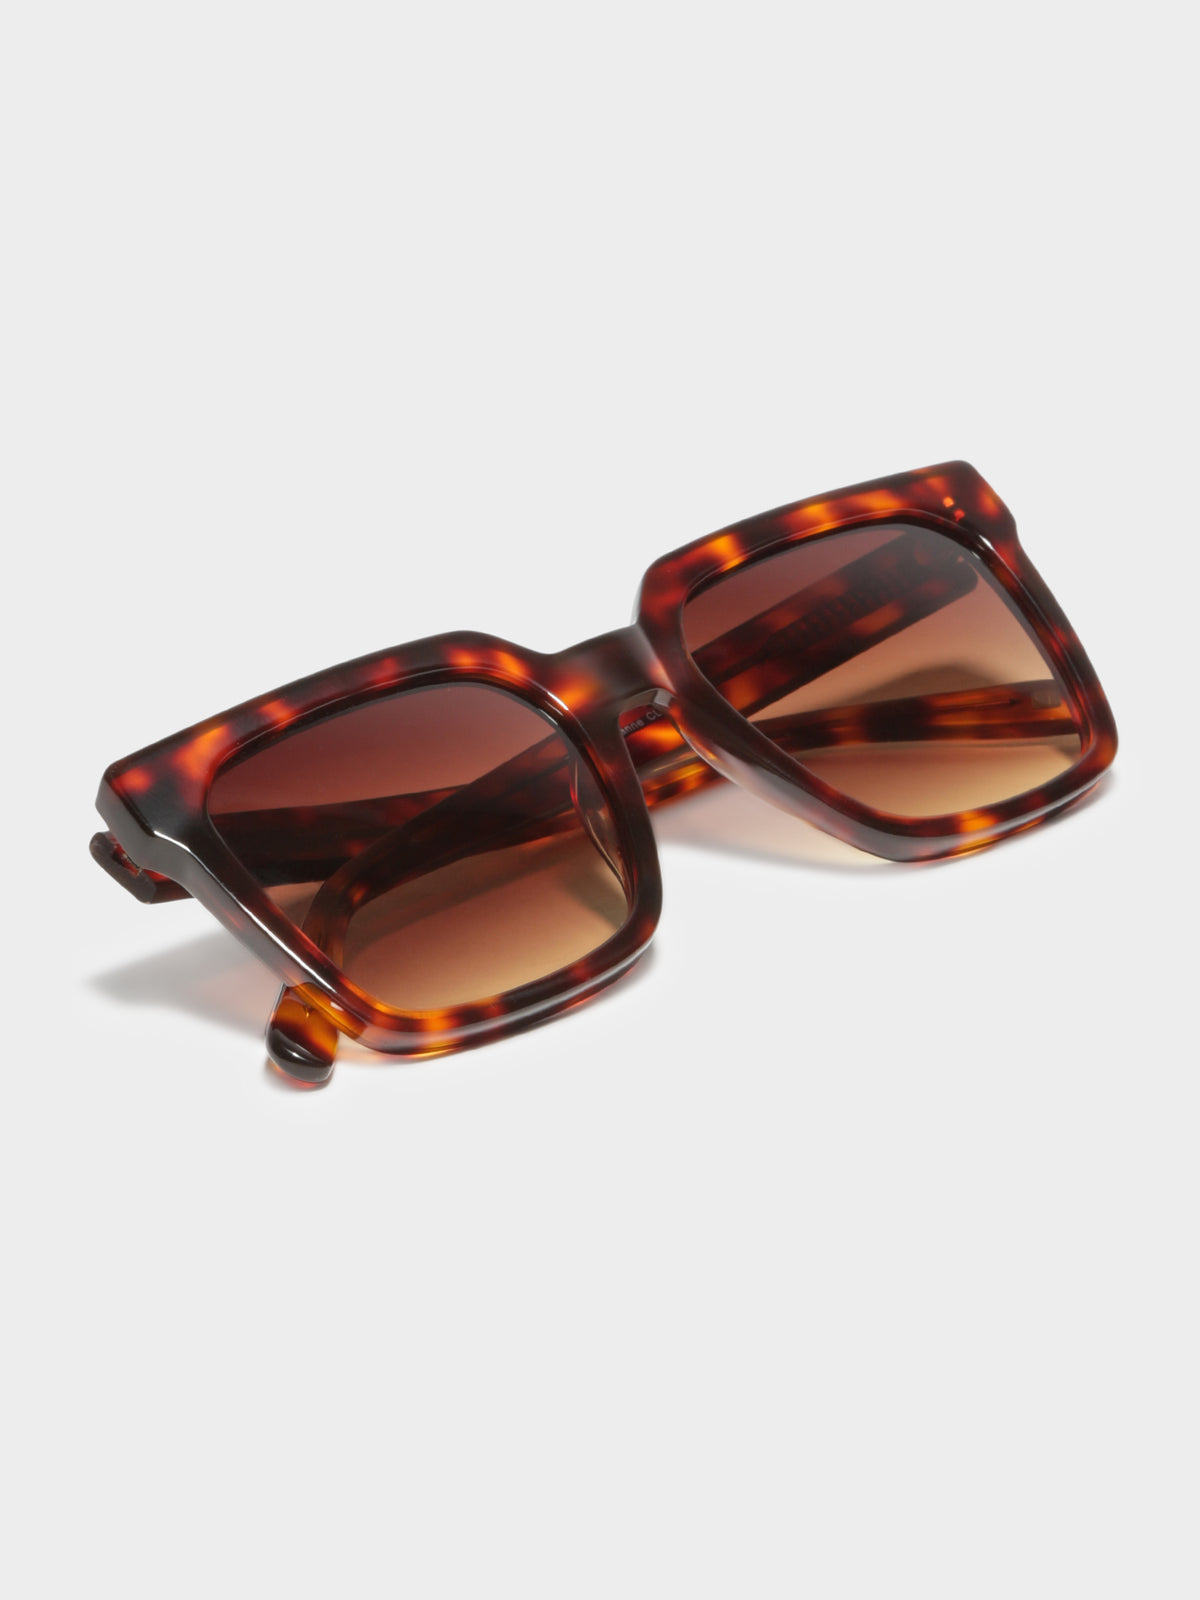 CL7806 Sunglasses in Brown Tortoise Shell